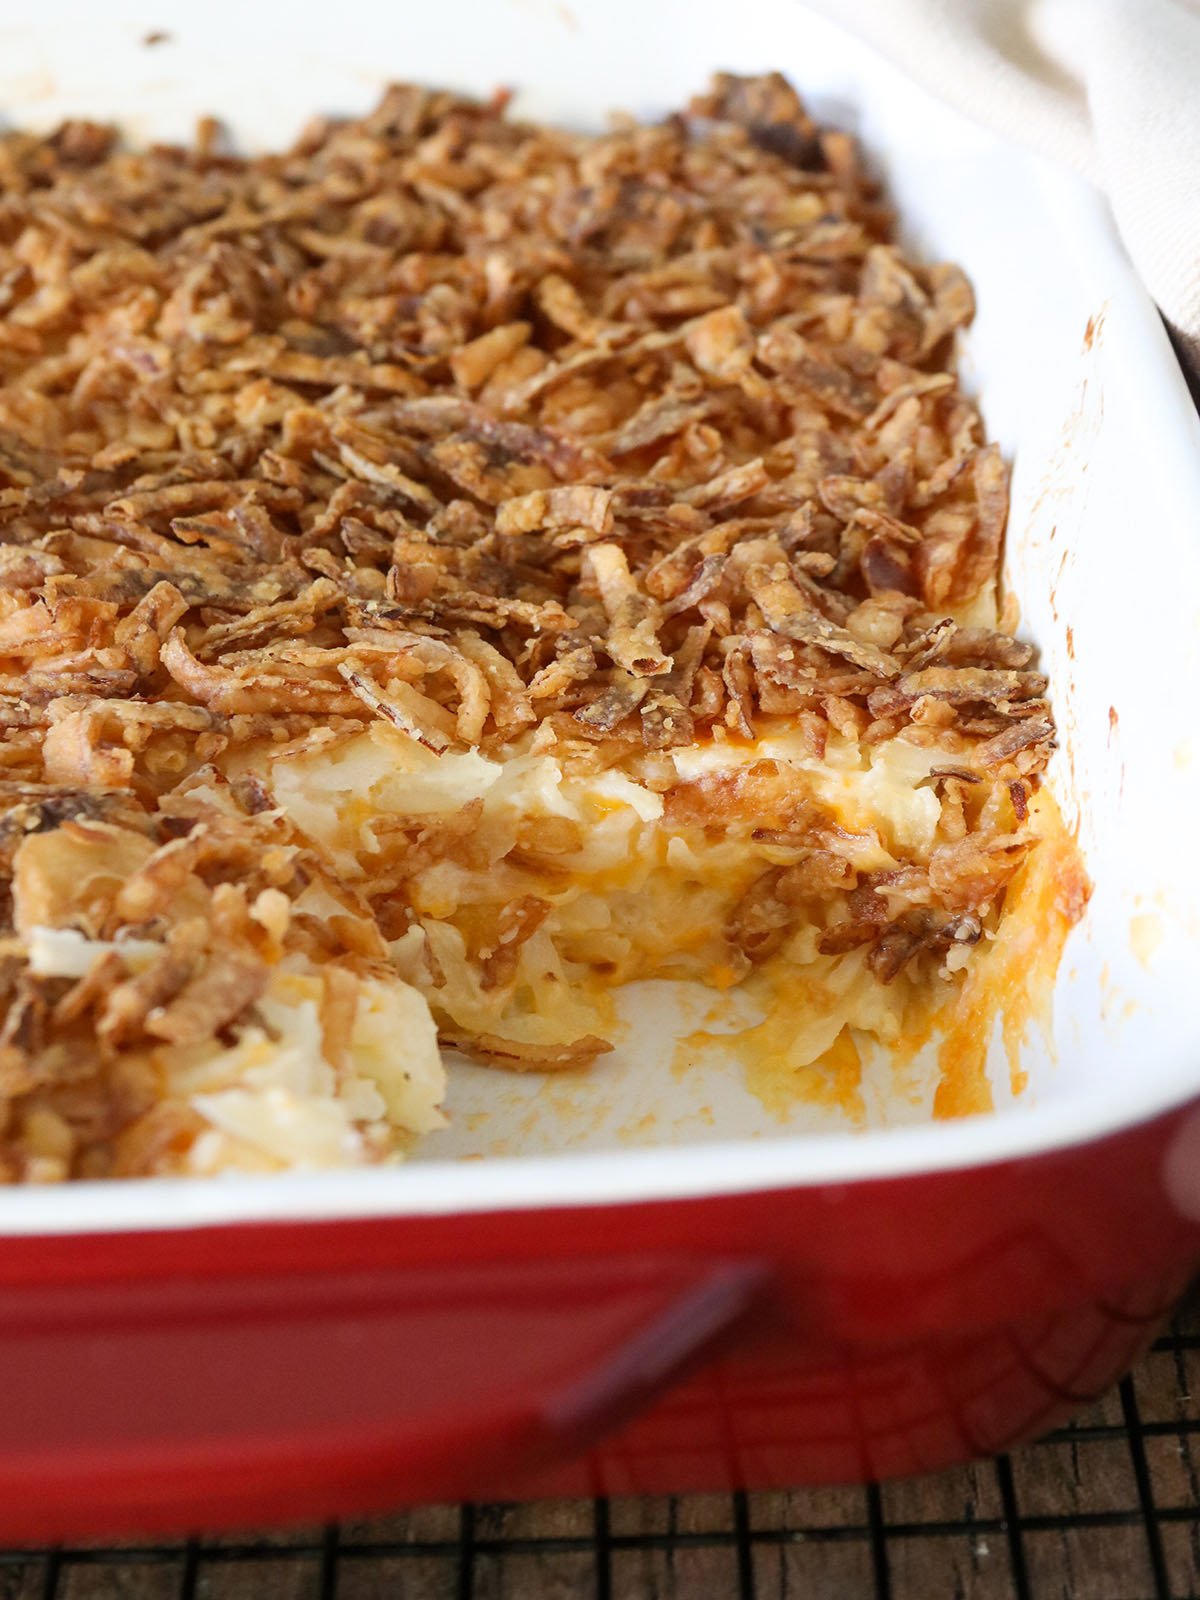 baked cheesy hashbrown casserole with crispy onion topping in a red casserole dish